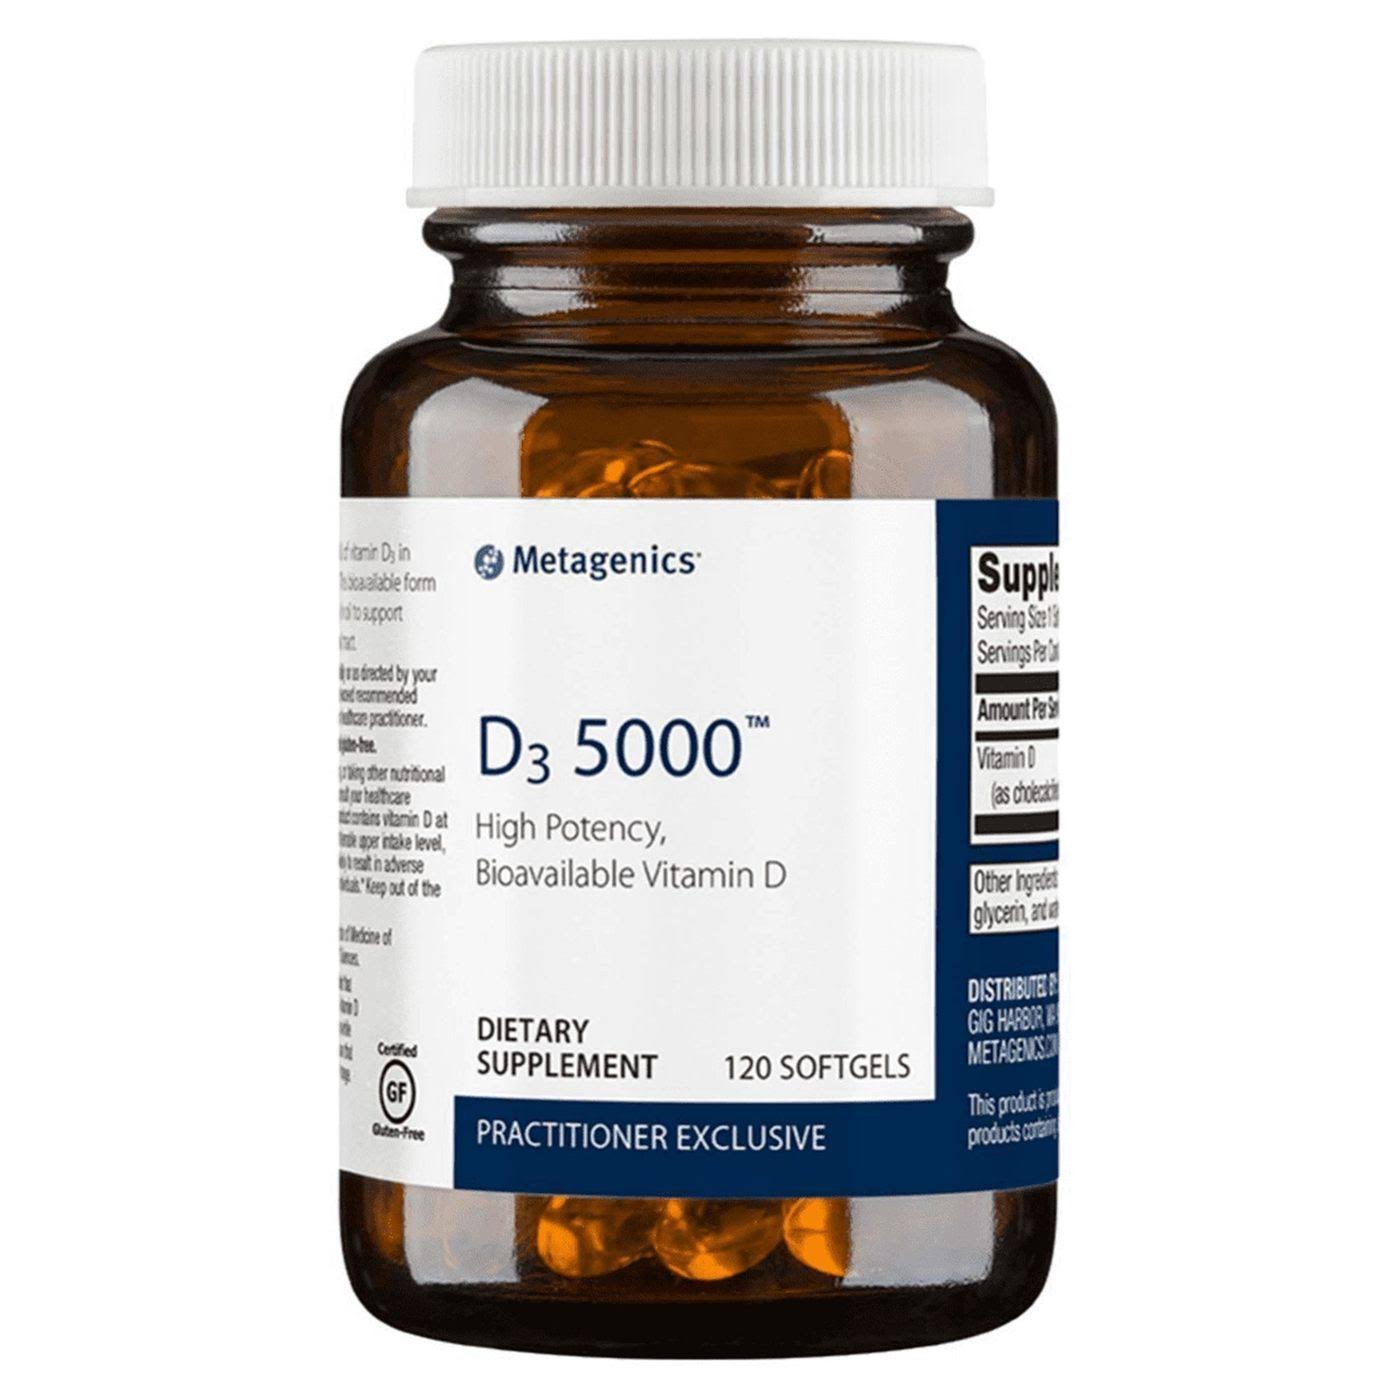 Metagenics D3 Bioavailable Vitamin D High Potency Supplemeant - 120 Count